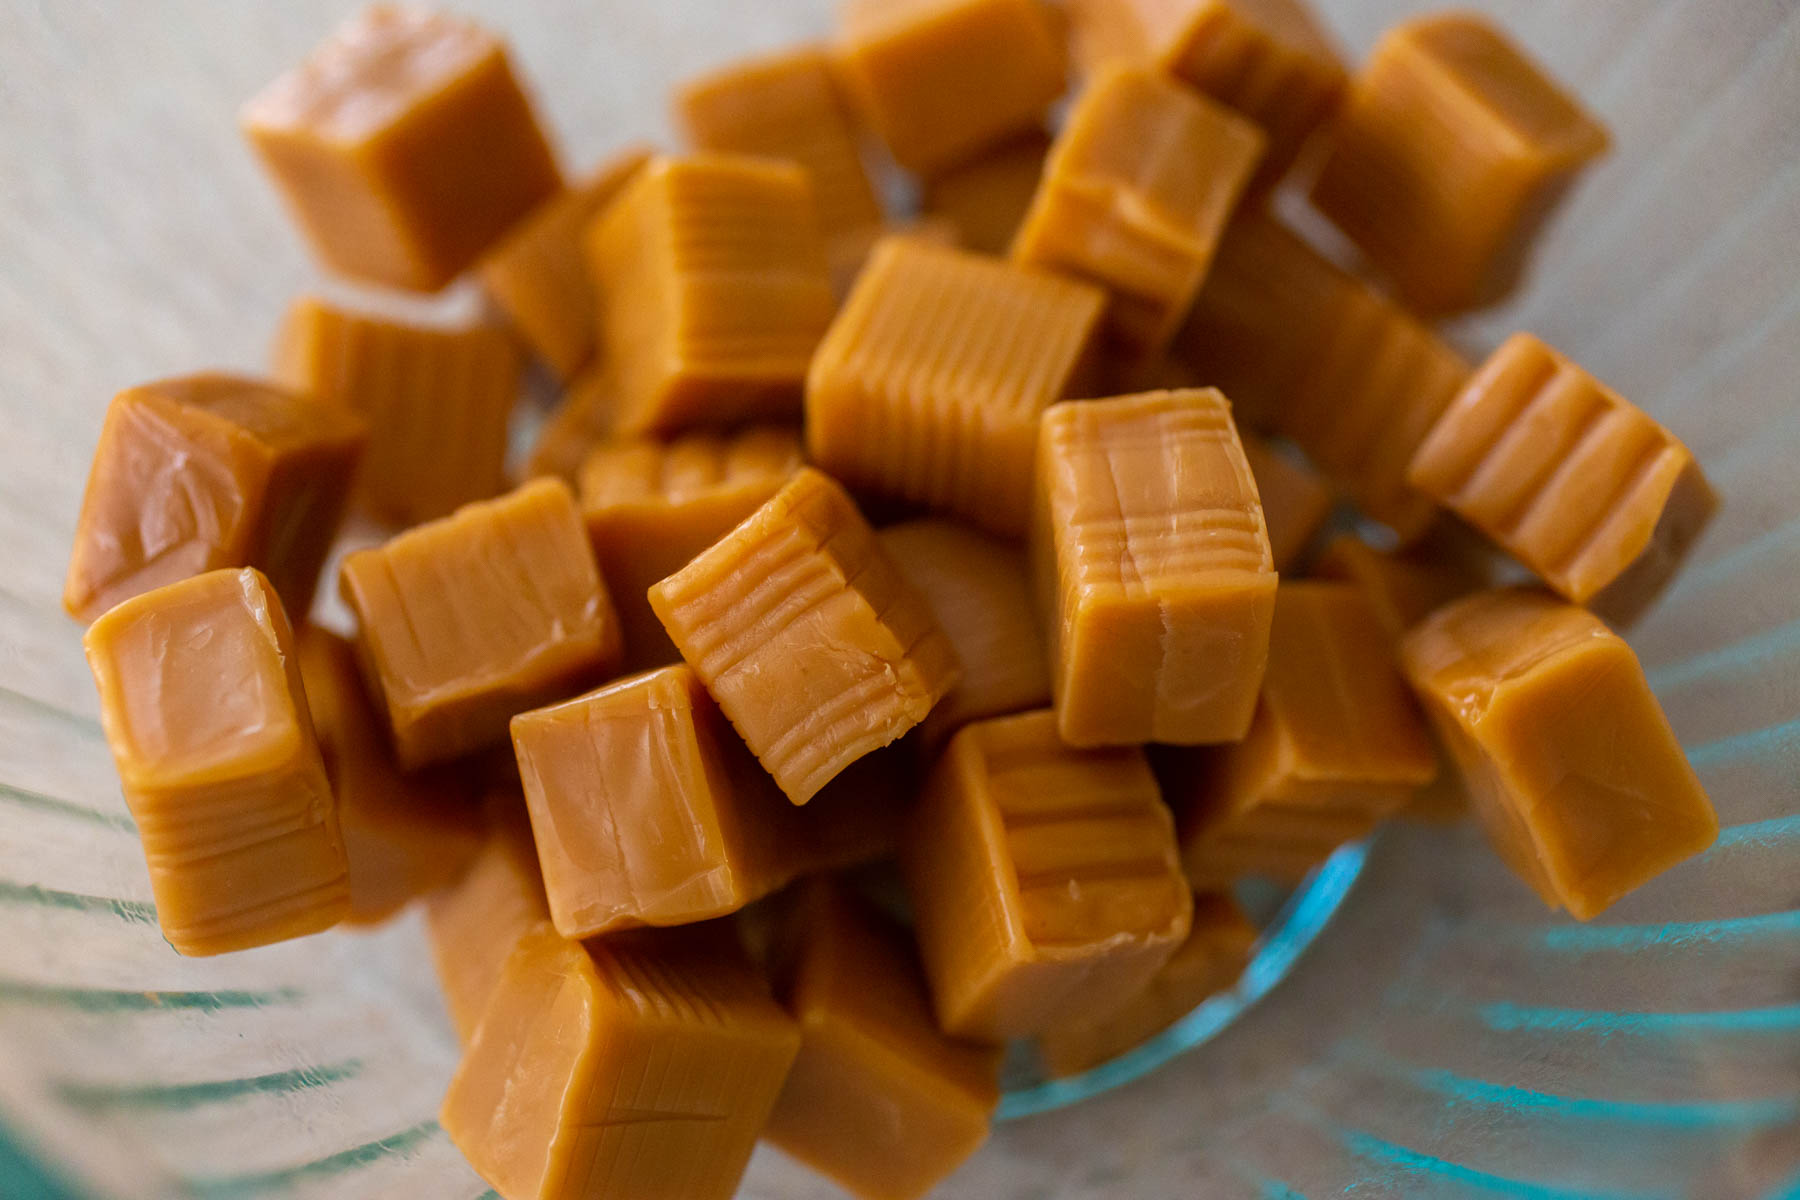 A glass mixing bowl has unwrapped caramel candies ready for melting.